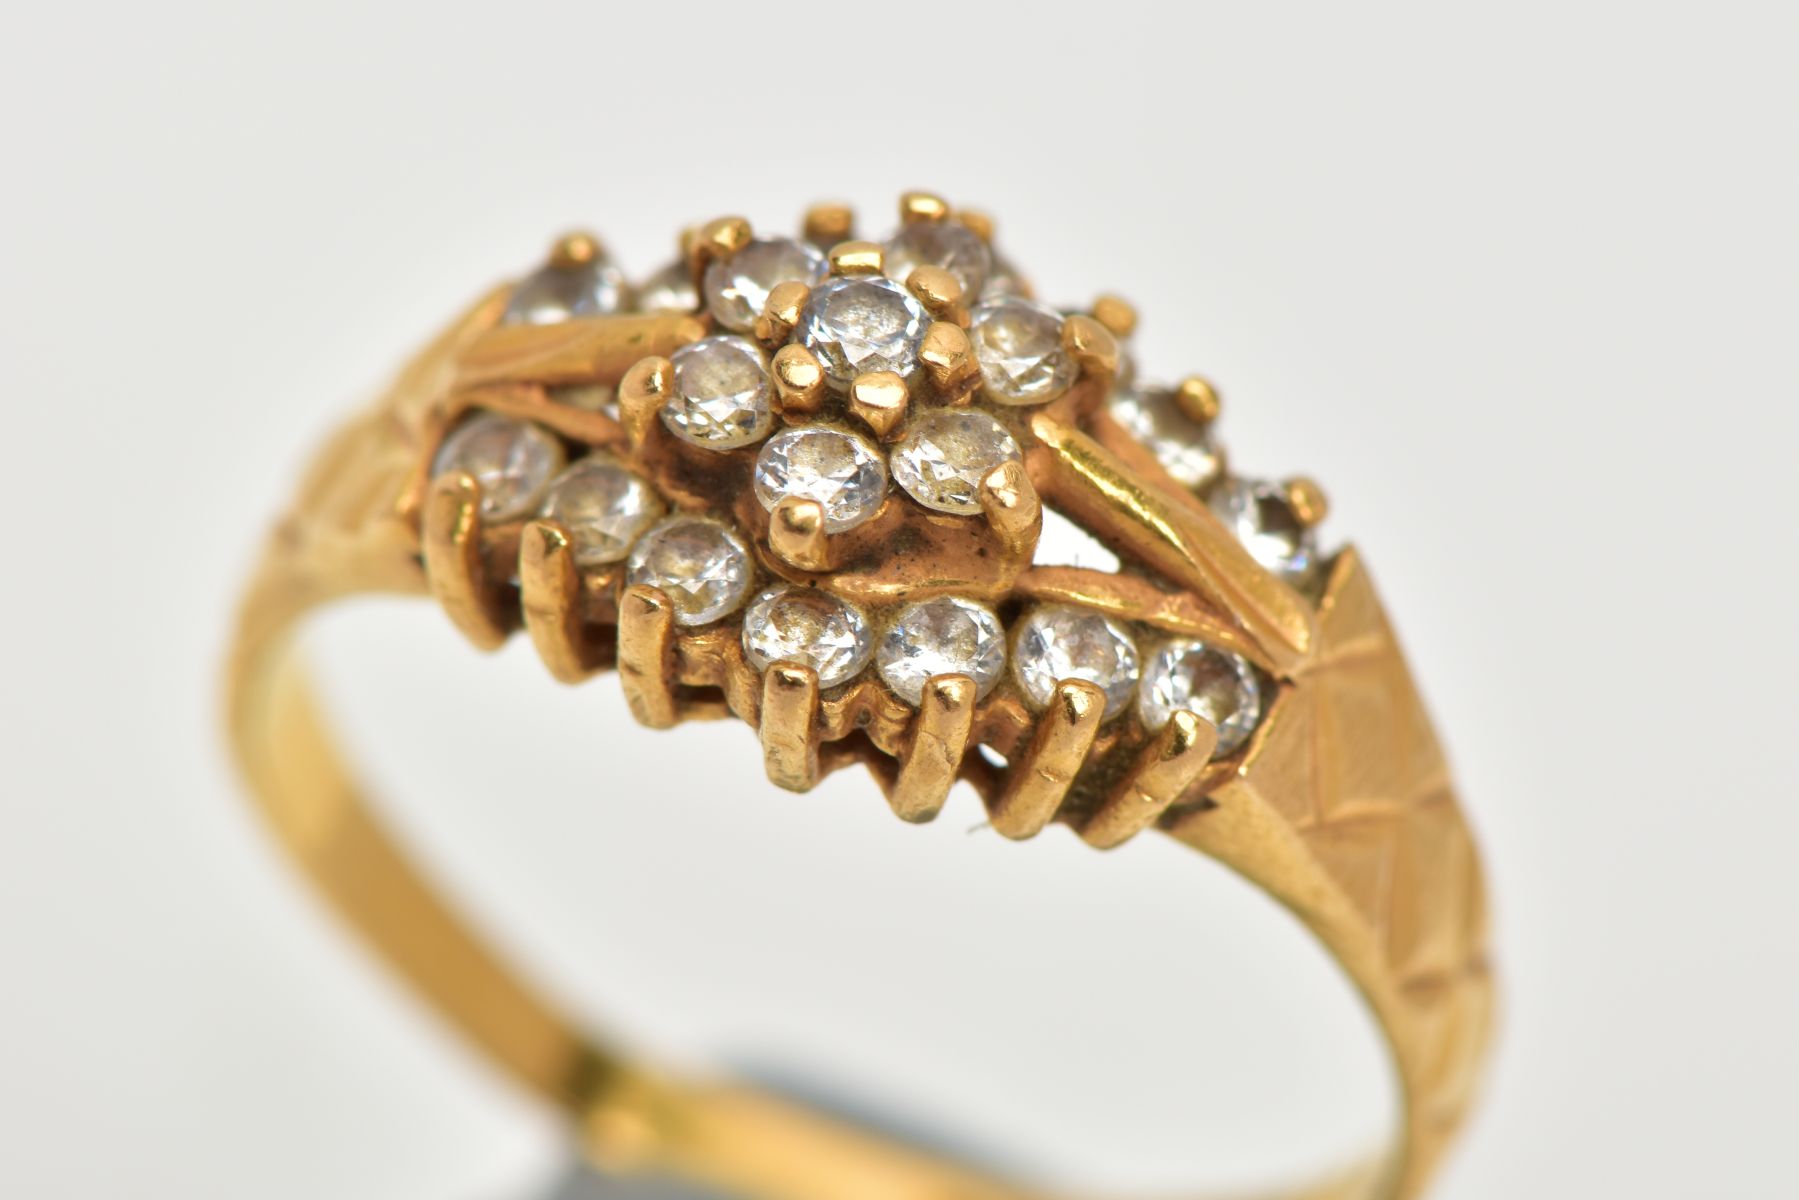 A 22CT GOLD CUBIC ZIRCONIA DRESS RING, set with a flower cluster of colourless cubic zirconia - Image 5 of 5